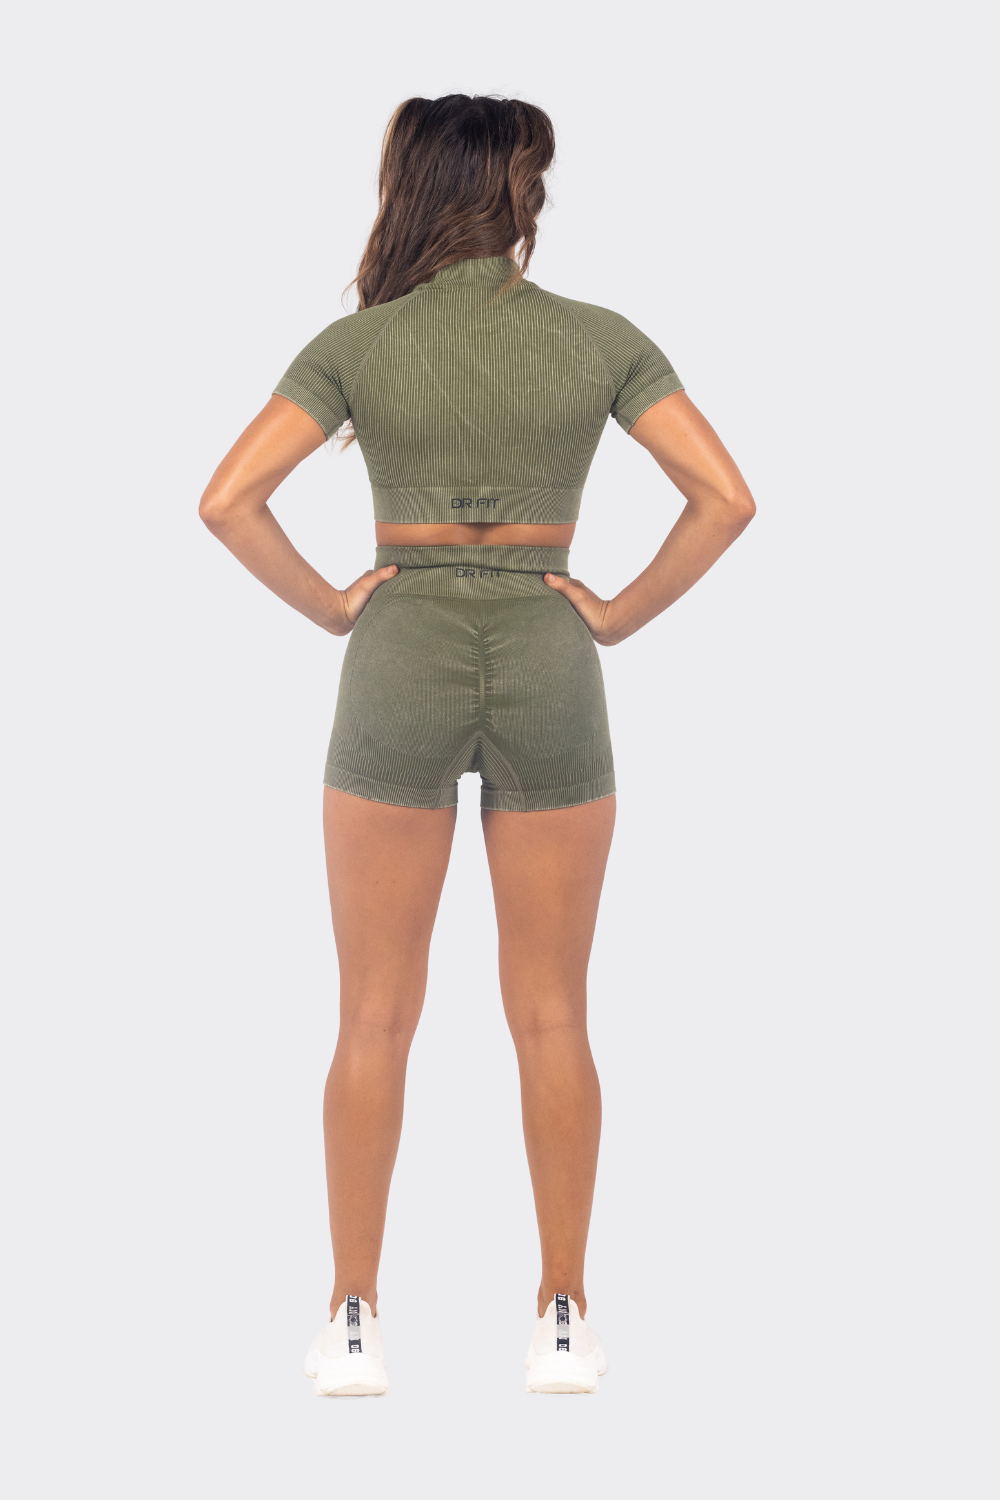 Turtle Neck Army Green Short Set